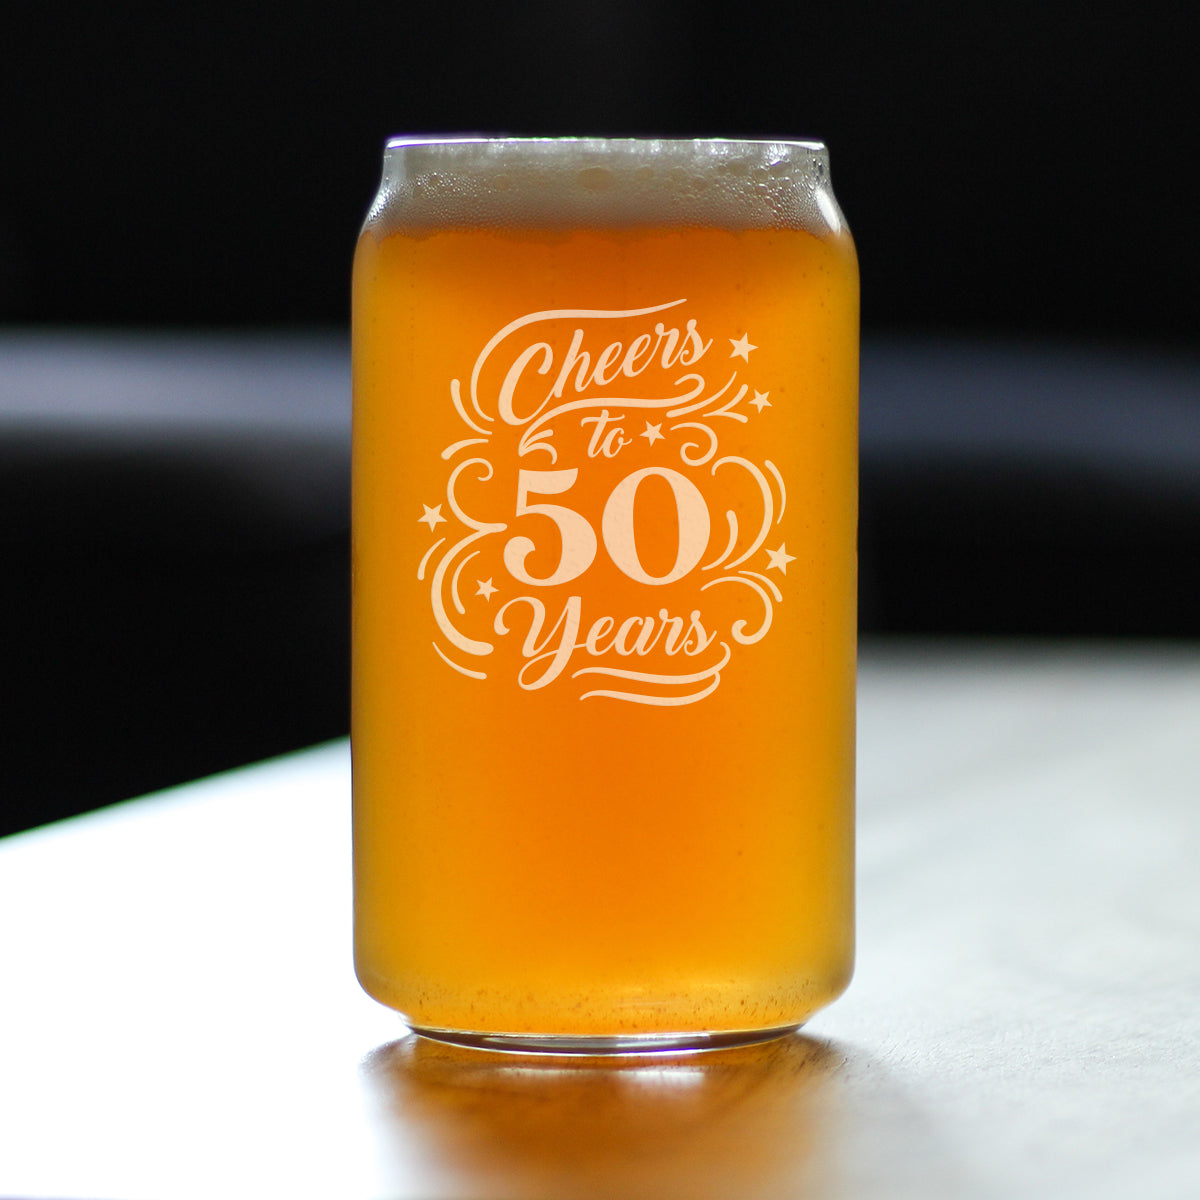 Cheers to 50 Years - Beer Can Pint Glass Gifts for Women &amp; Men - 50th Anniversary Party Decor - 16 Oz Glasses